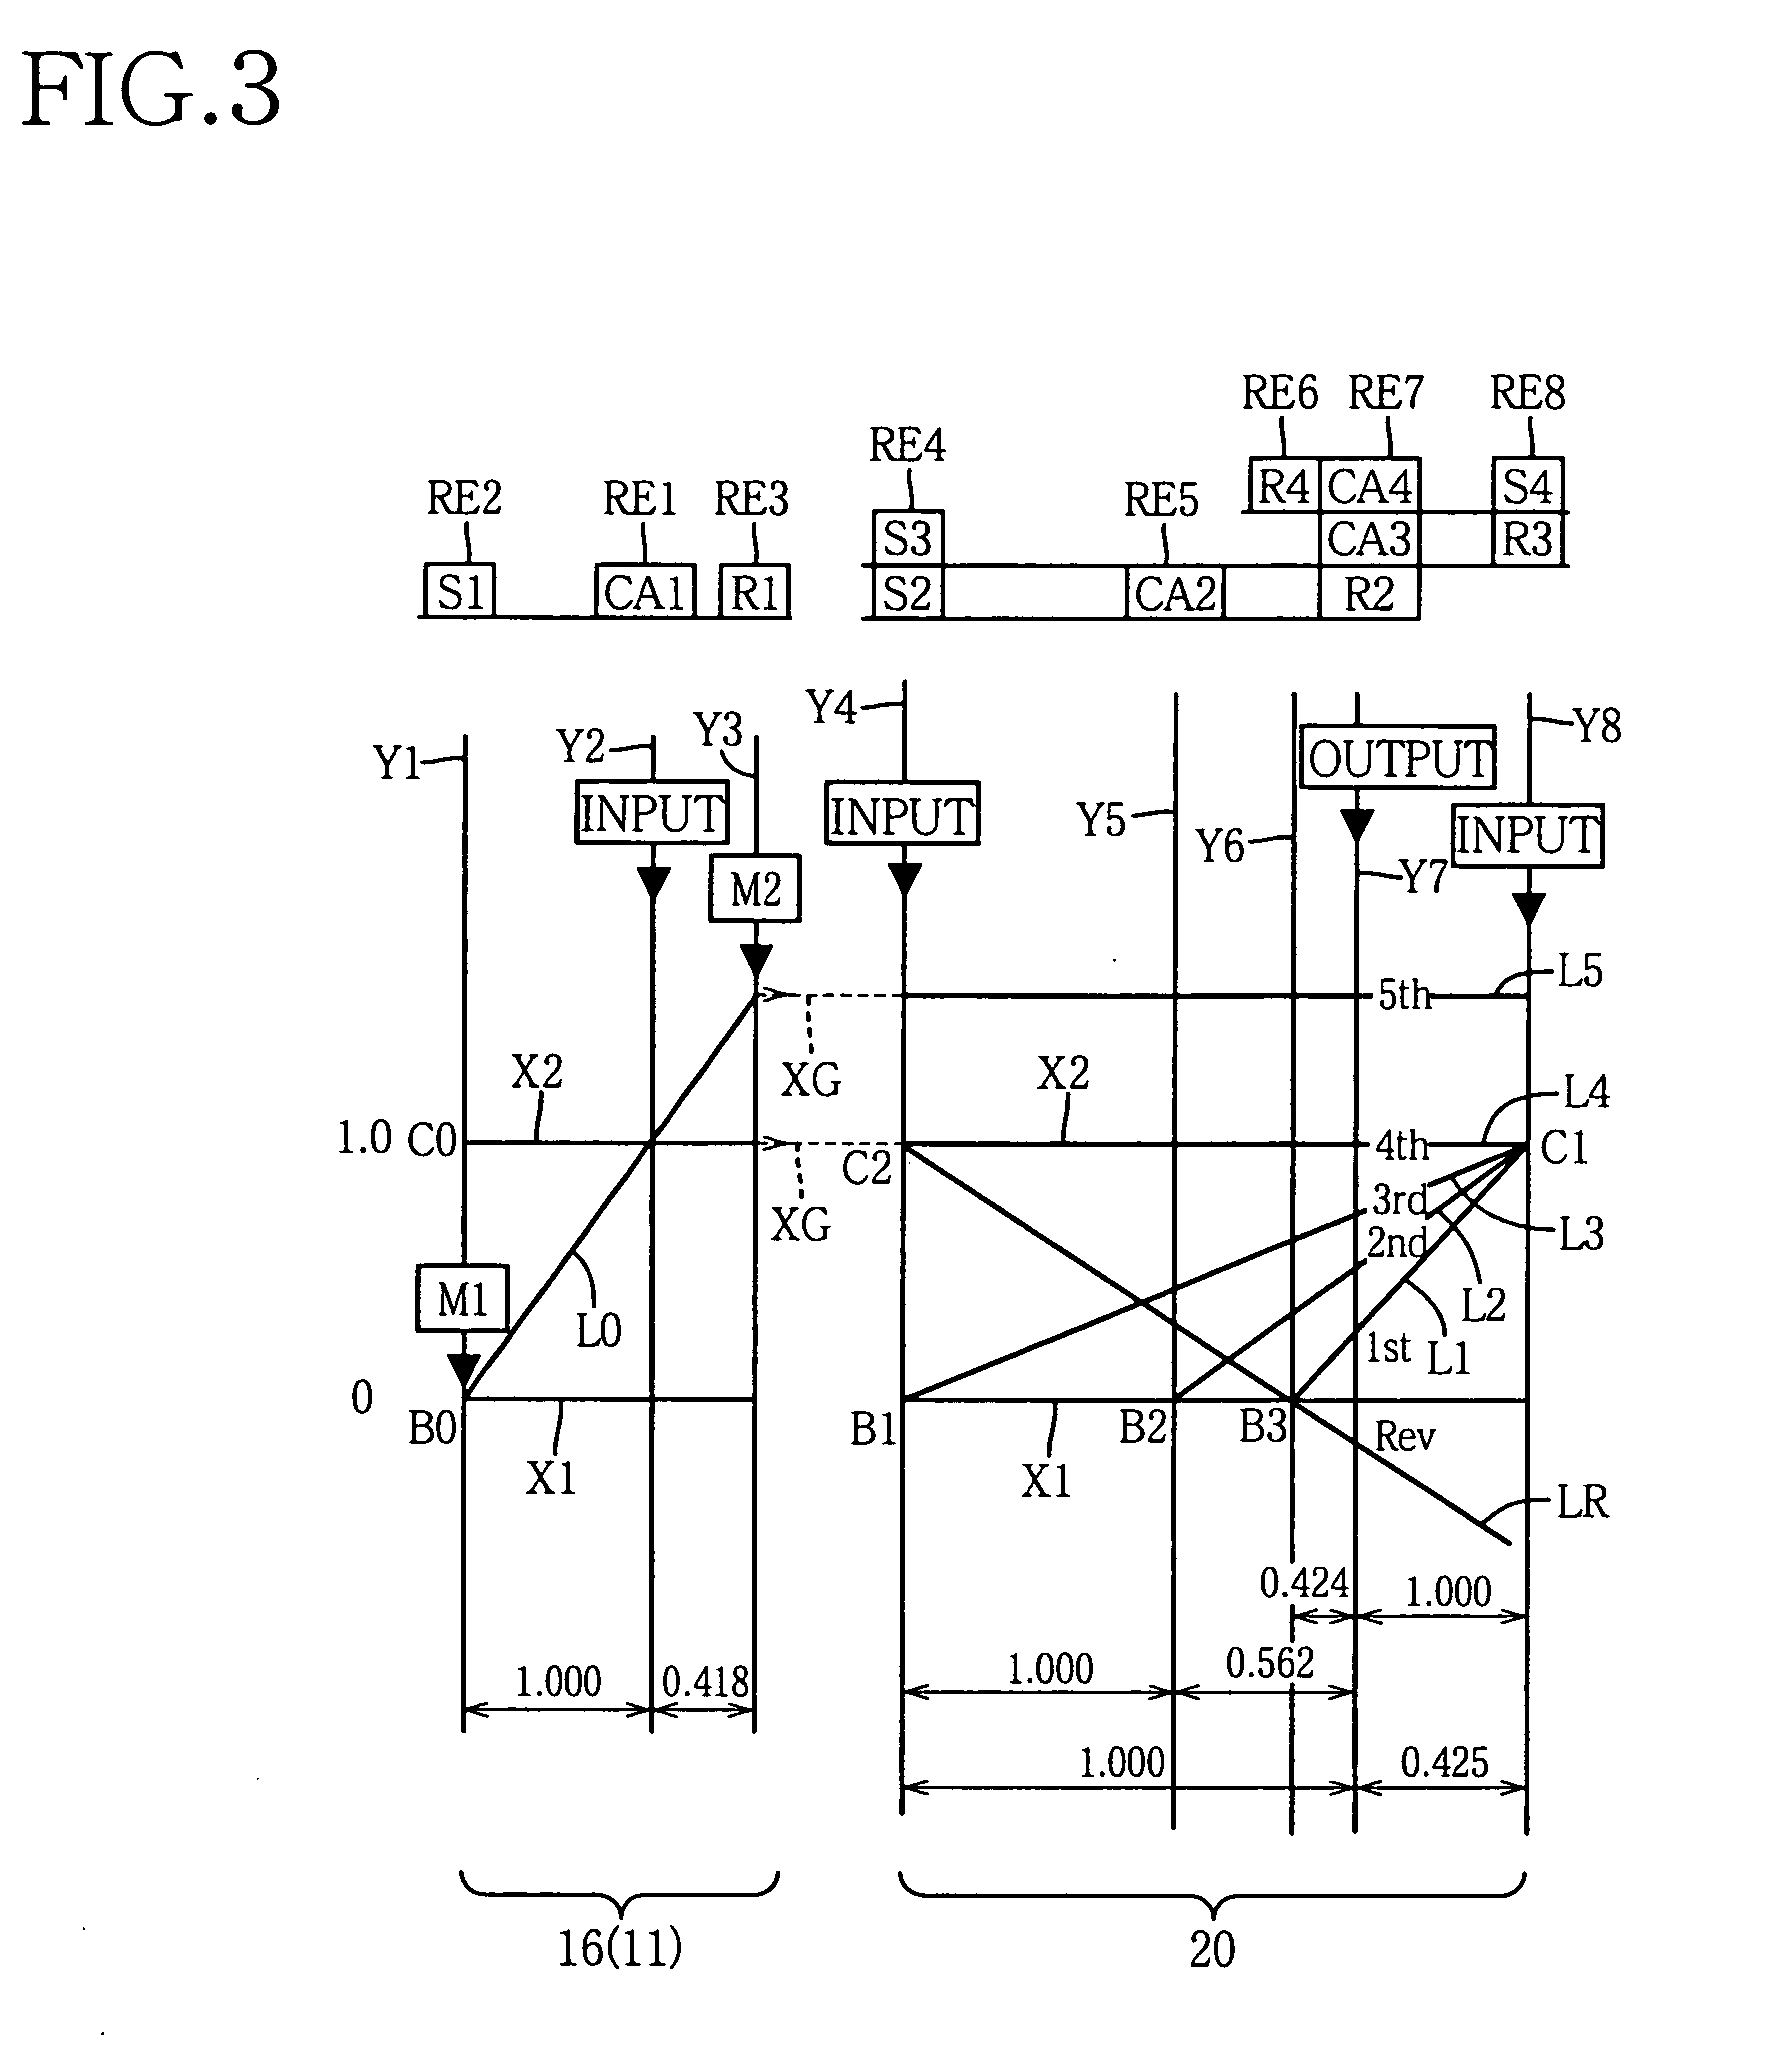 Control apparatus for controlling vehicle drive apparatus, and vehicle drive system including the control apparatus